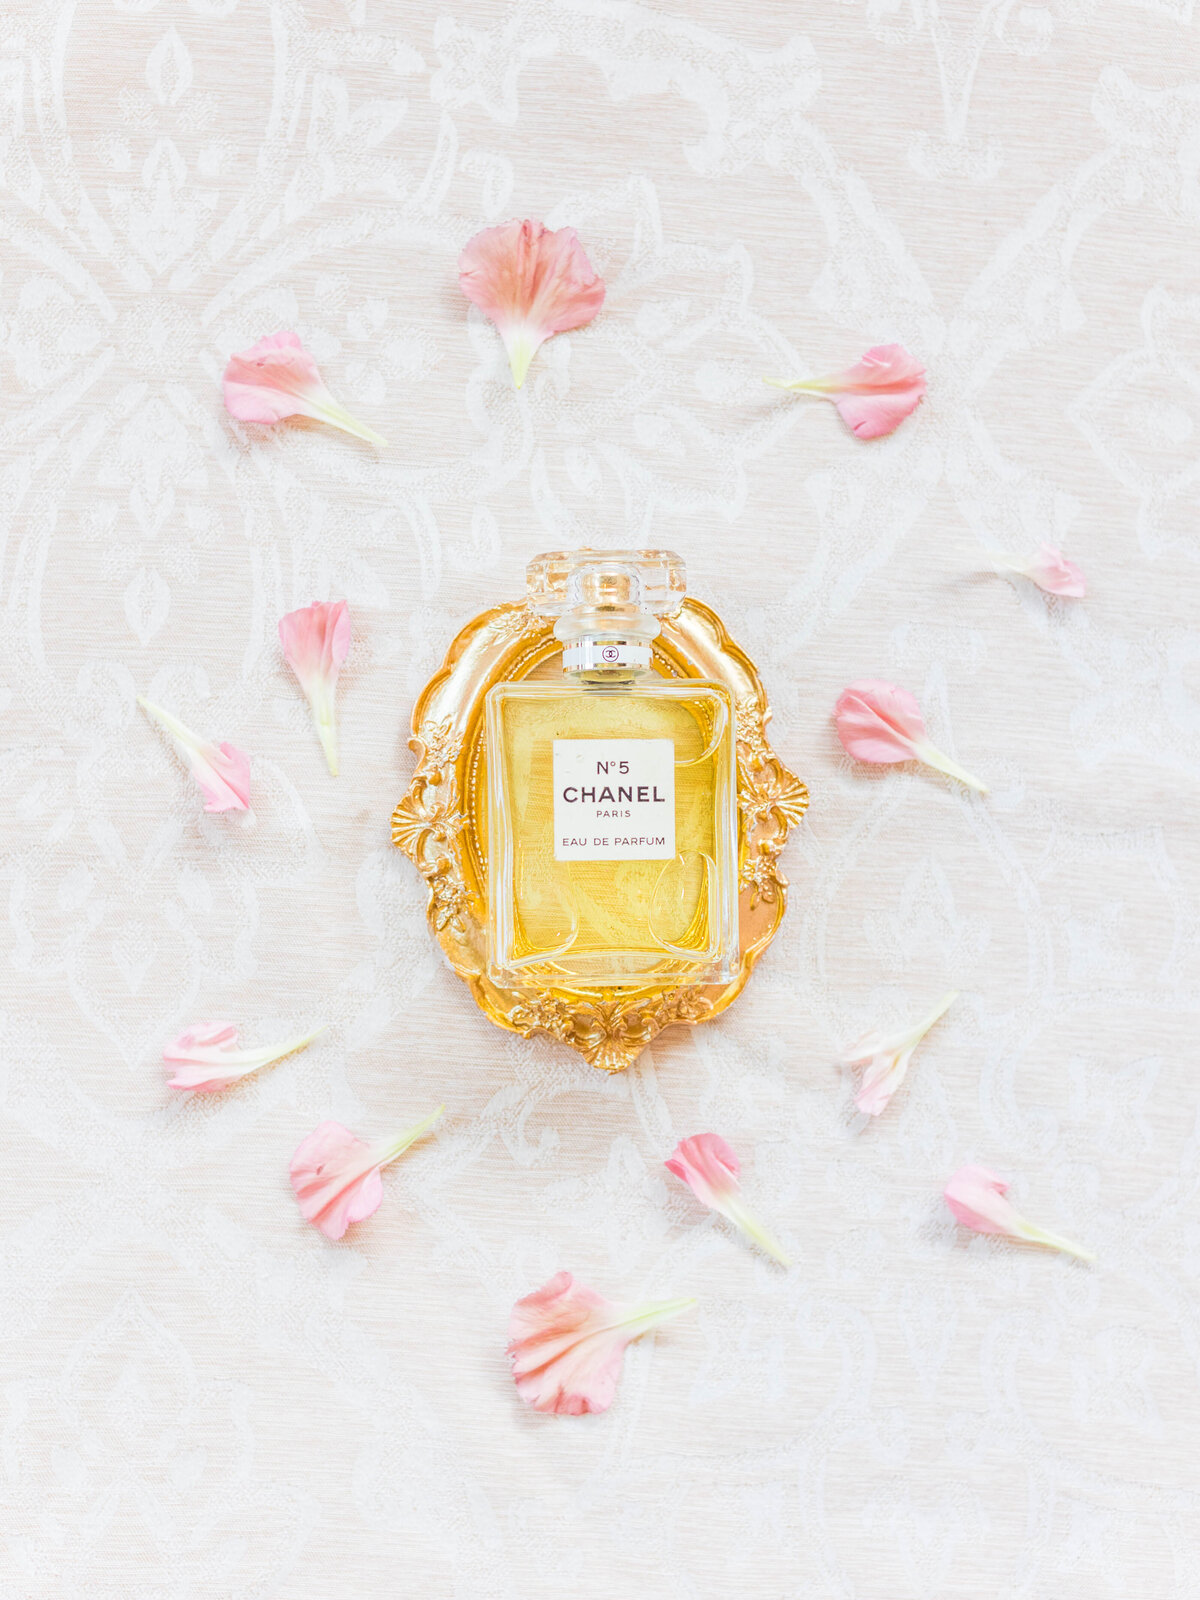 chanel perfume bottle styled with pink florals